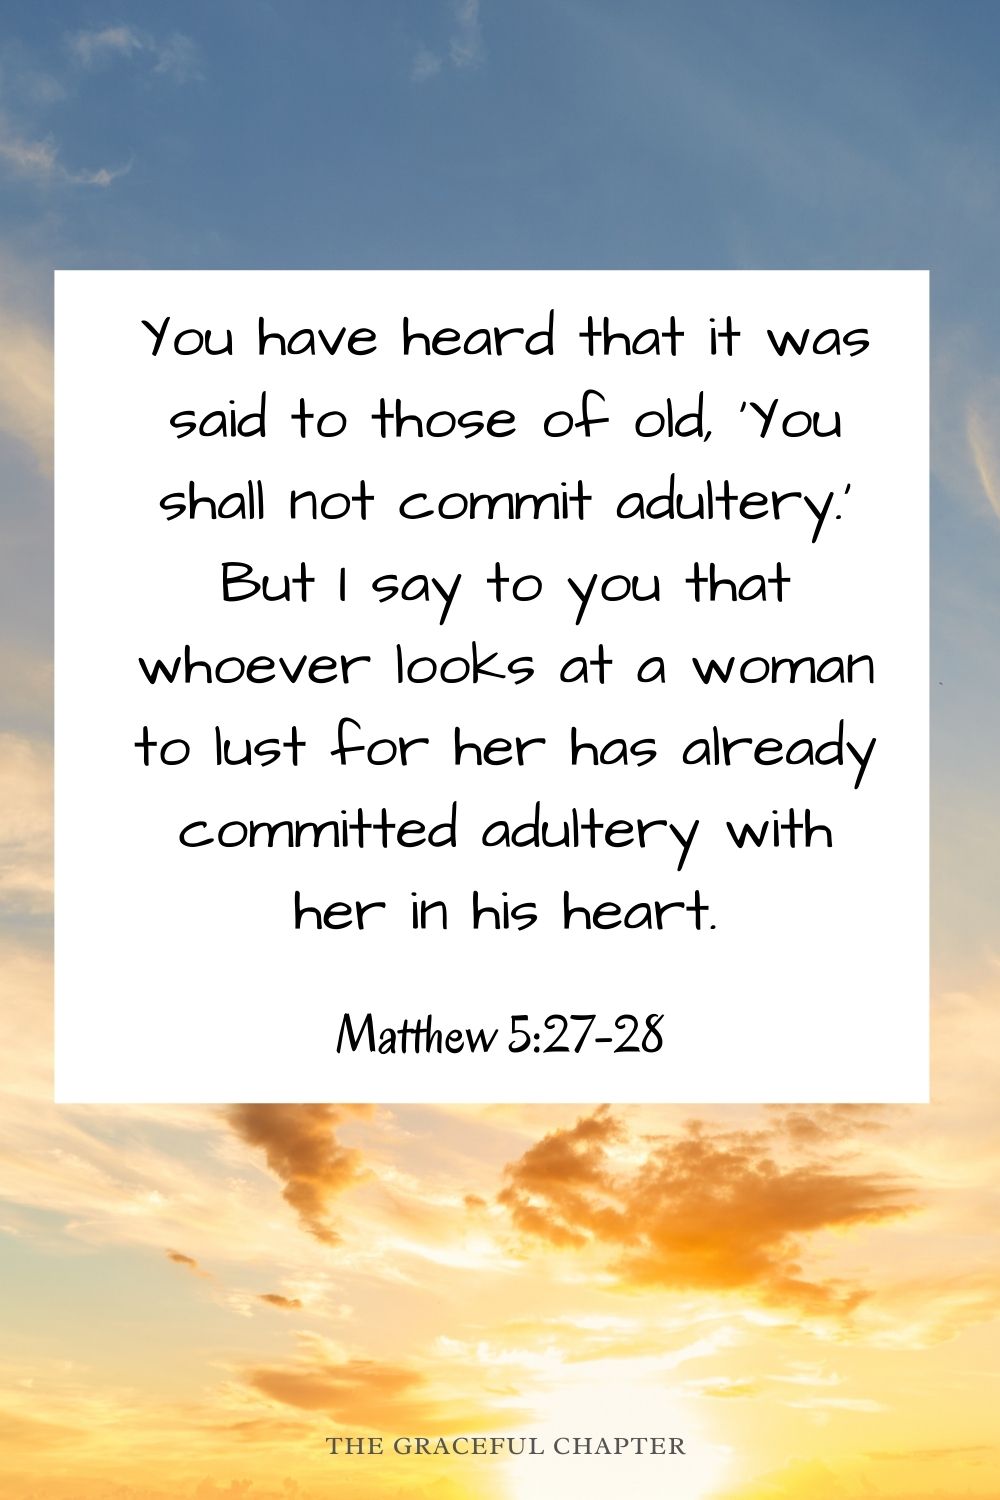 You have heard that it was said to those of old, ‘You shall not commit adultery.’ But I say to you that whoever looks at a woman to lust for her has already committed adultery with her in his heart. Matthew 5:27-28